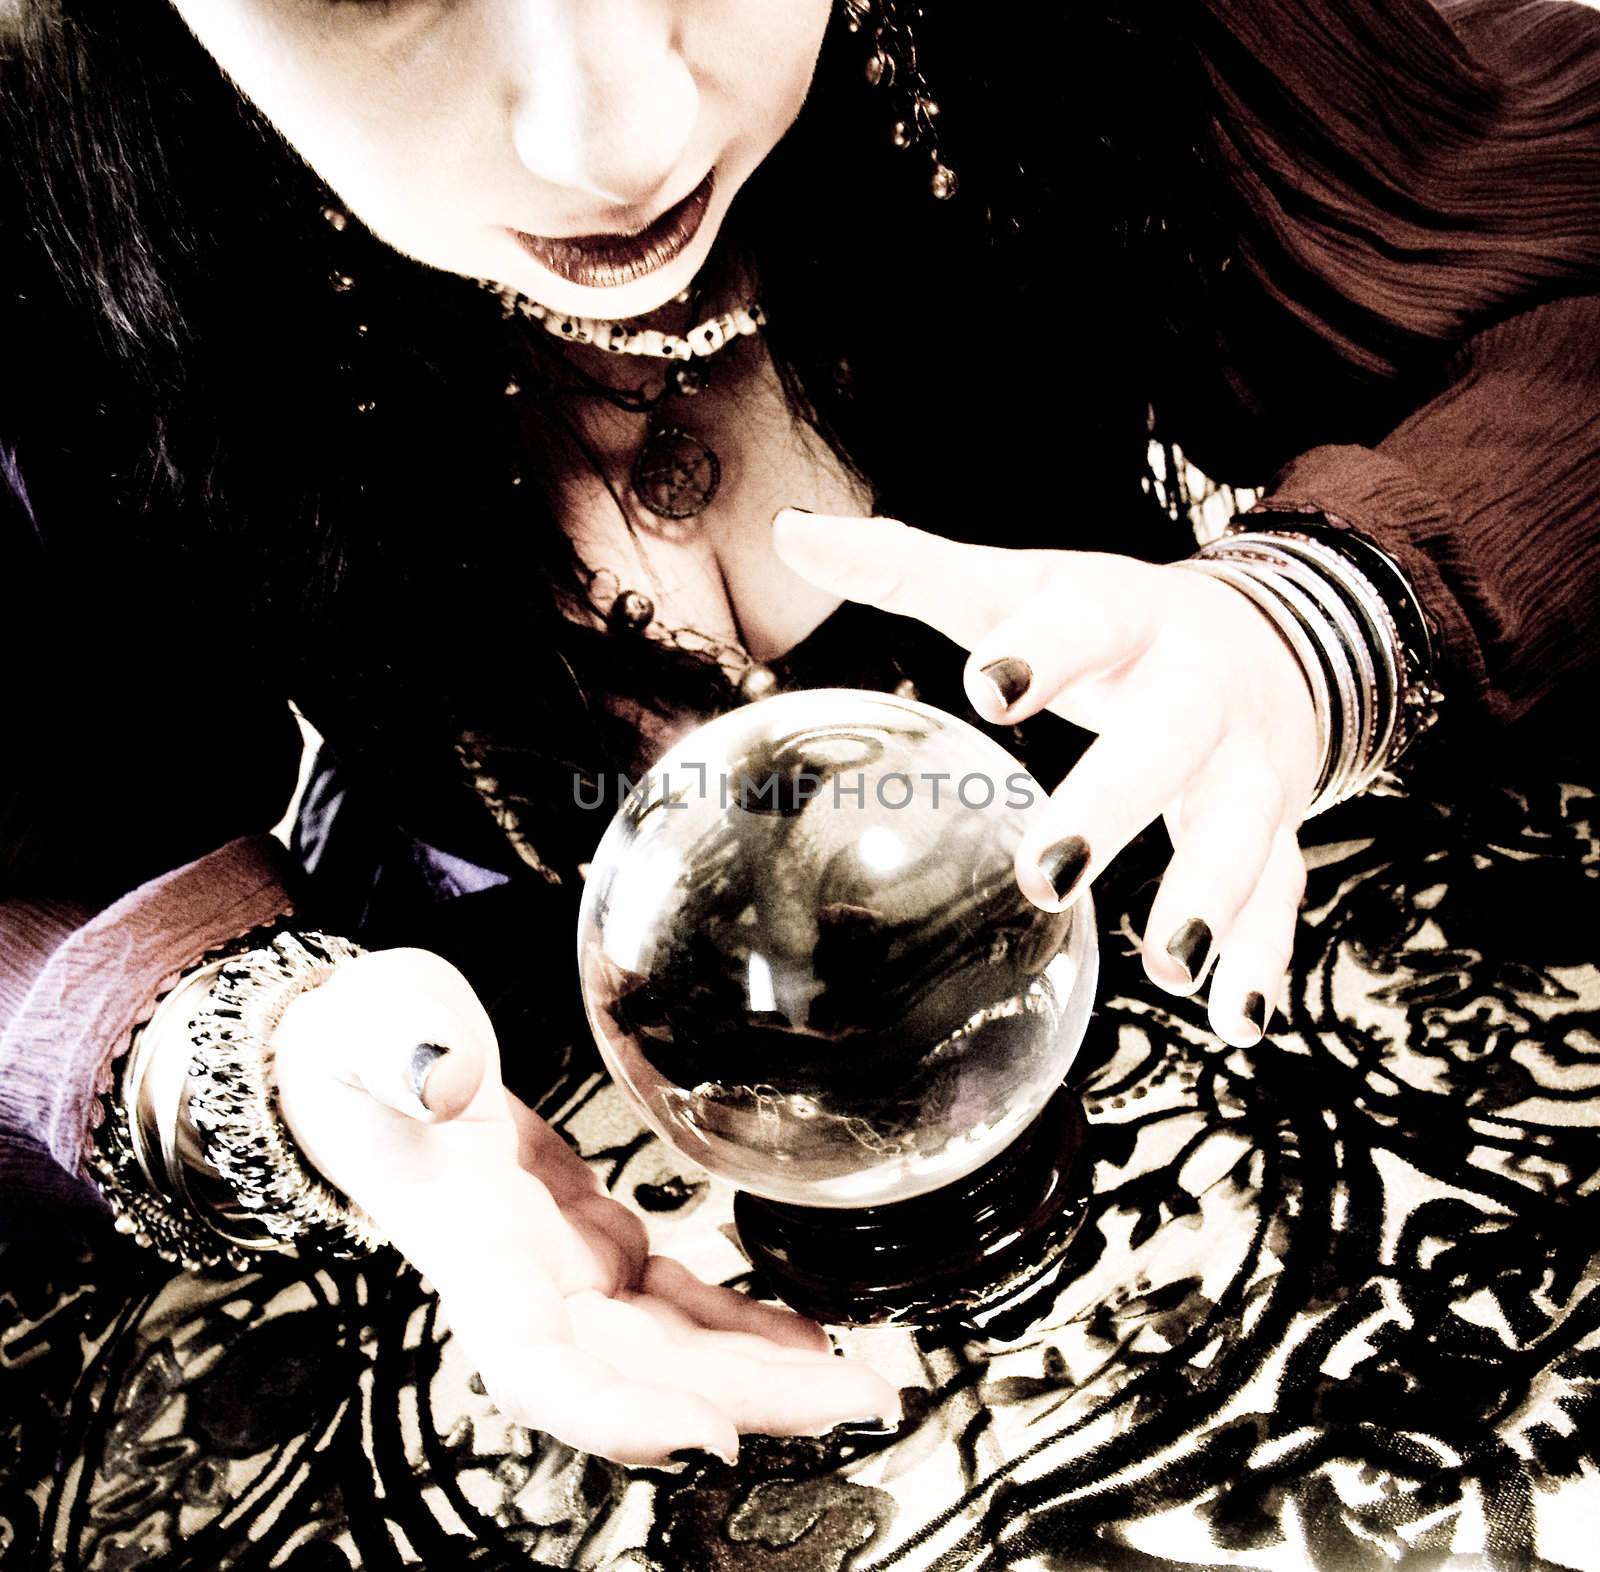 A fortune teller leans over her crystal ball